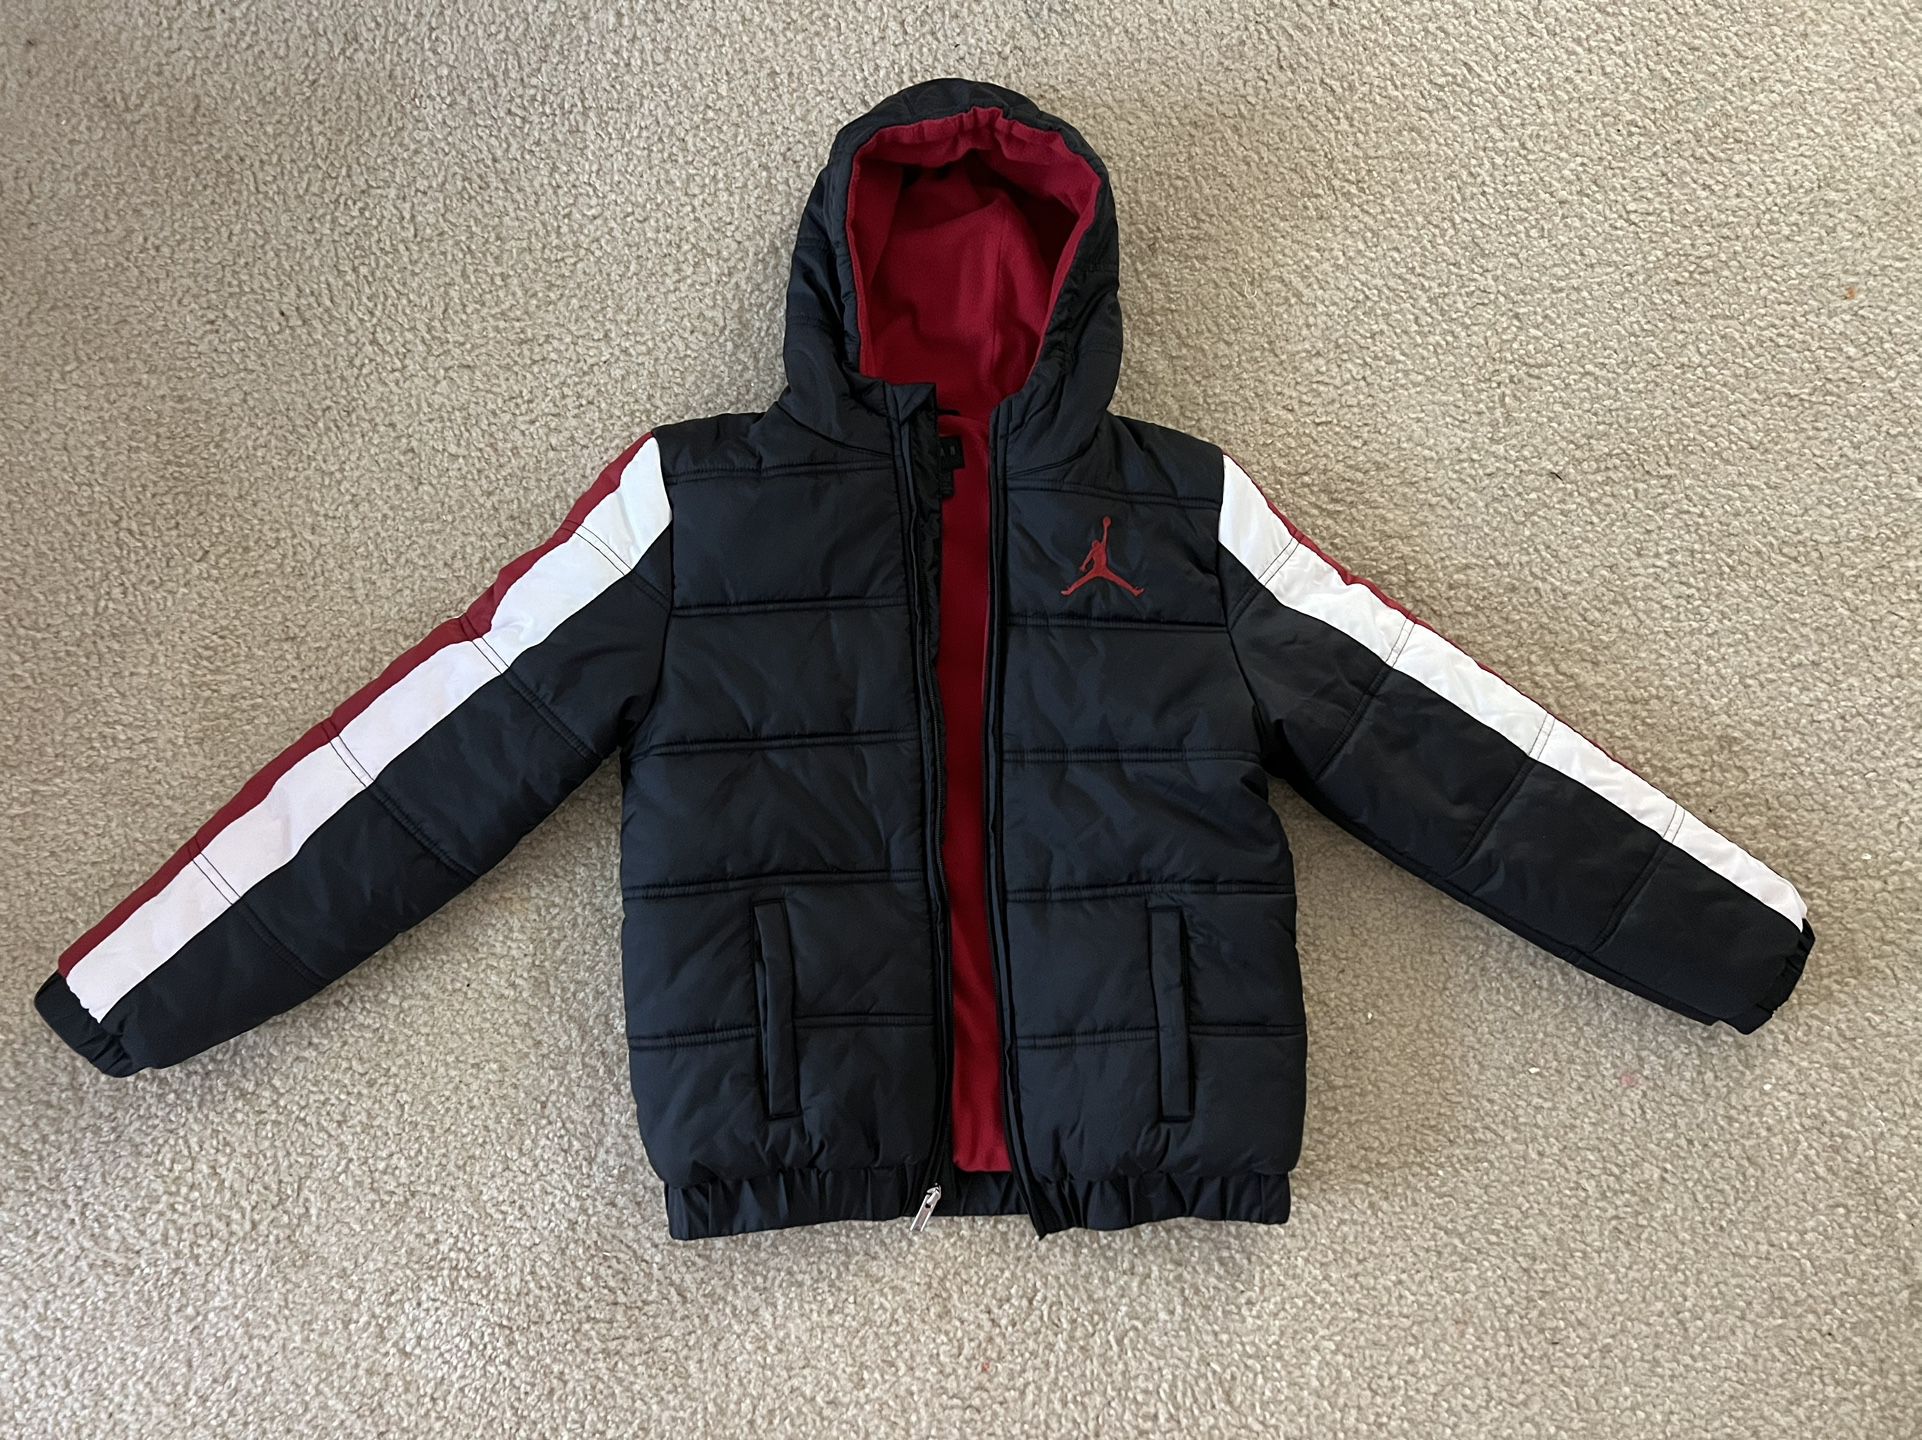 Jordan Jacket Coat Fleece Inside Waterproof Outside  Size L For  Around 12 Years Old 147 - 163 Cm High Very Good Condition  Snow Jacket 